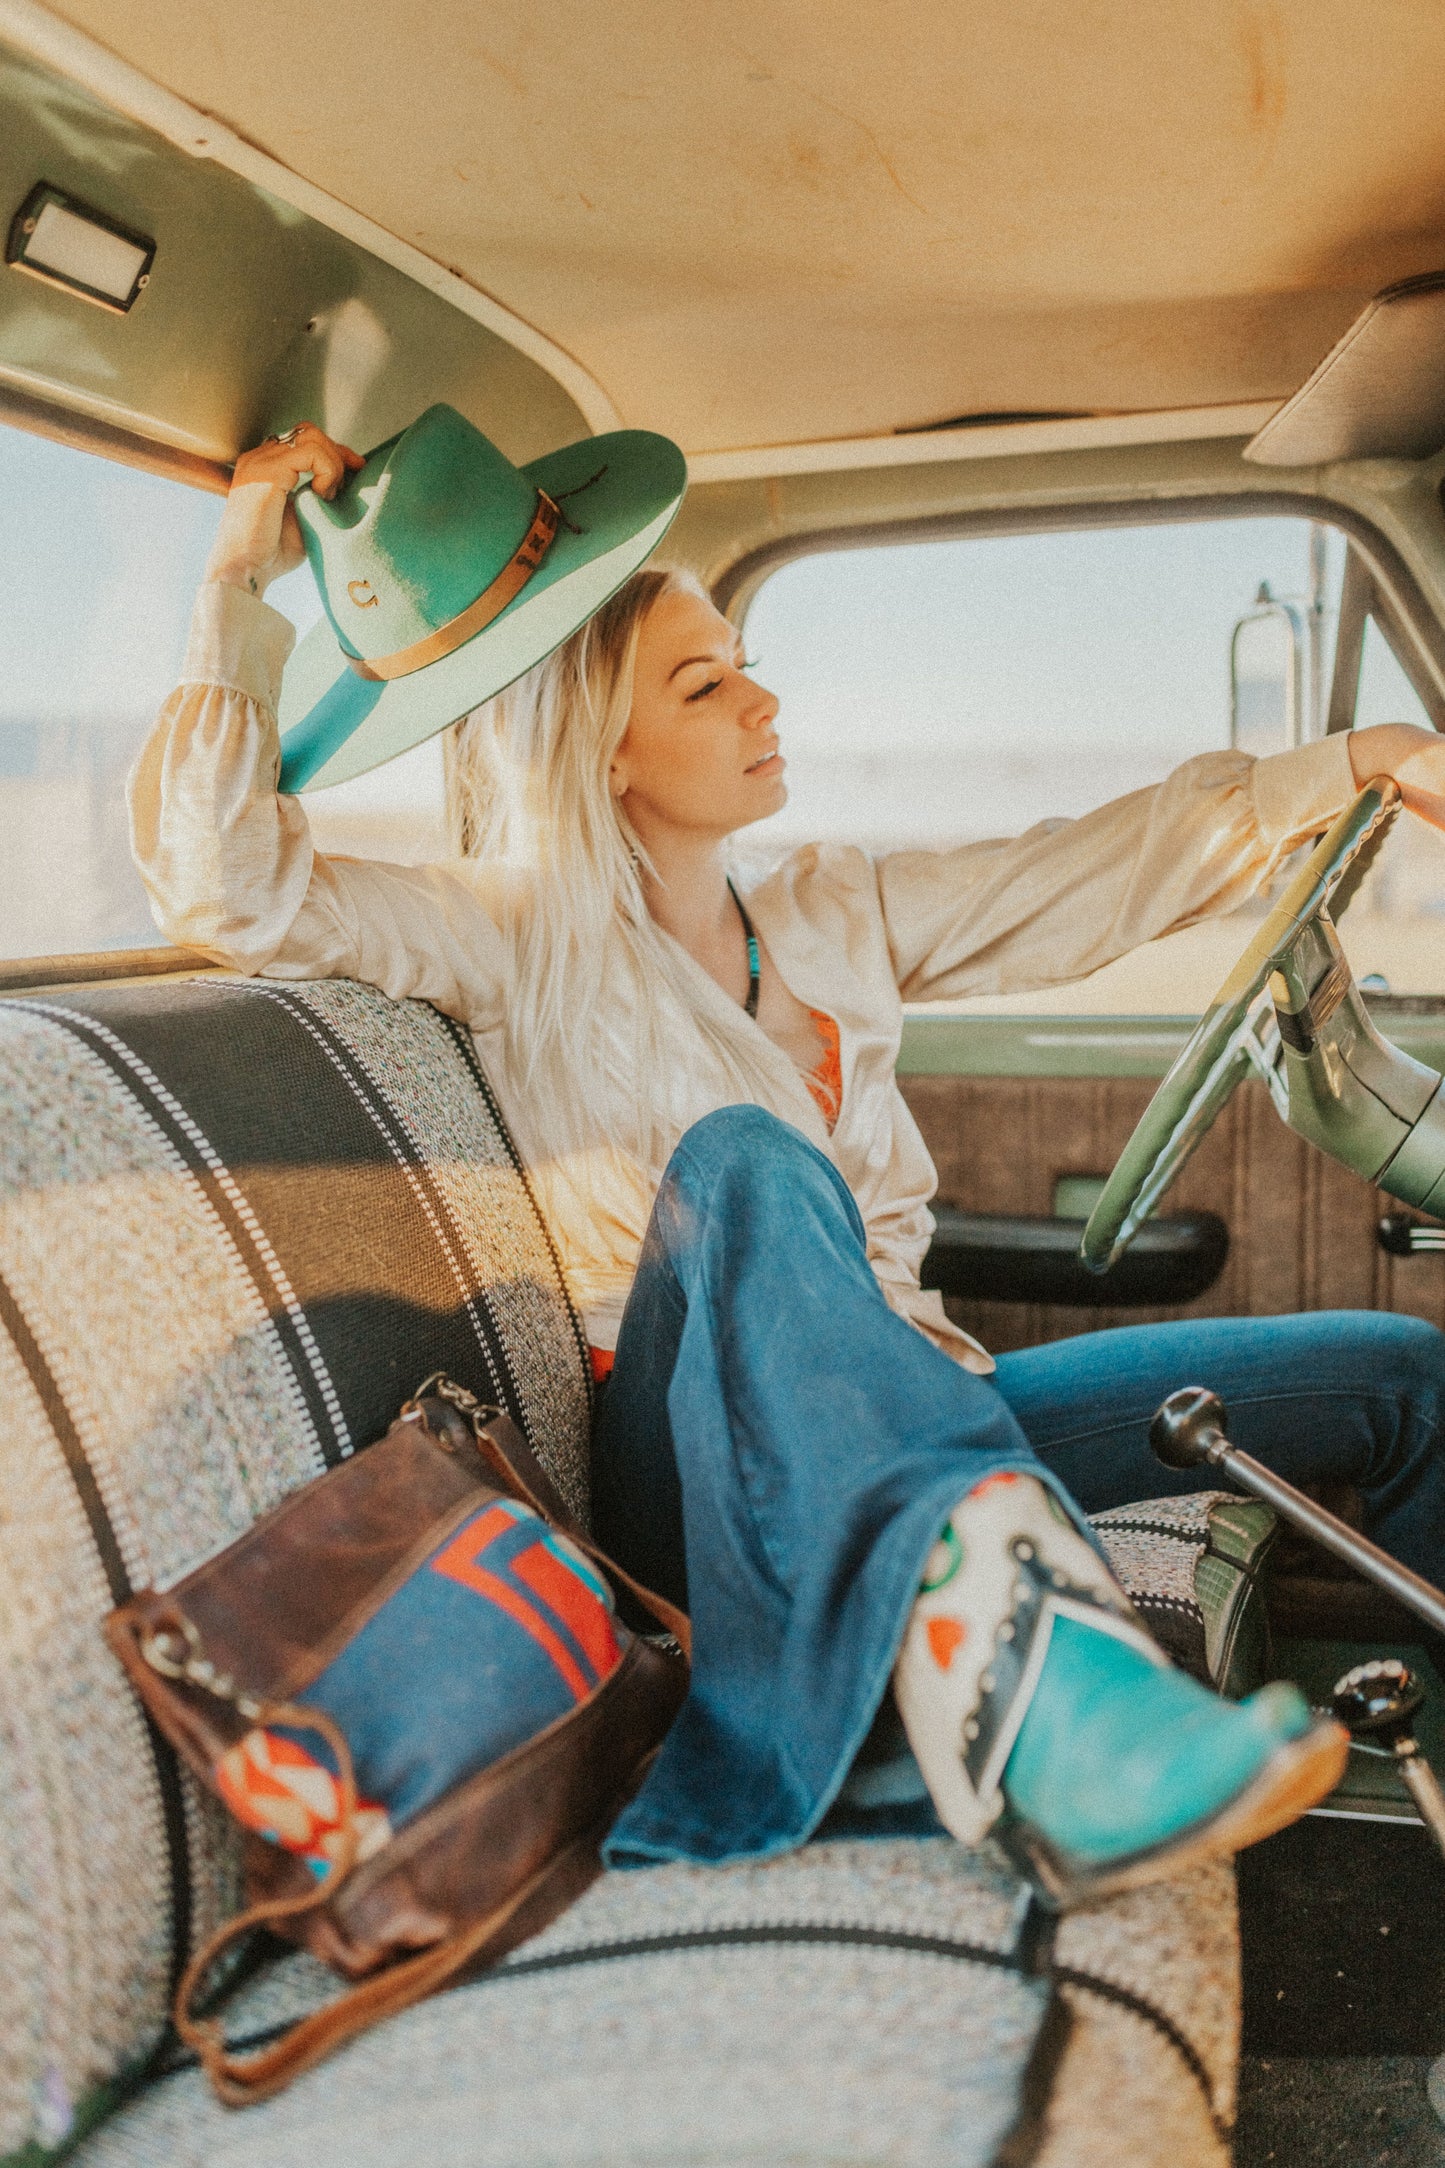 Woman sitting inside truck putting on the TeePee 78 Cowgirl Teal hat.  The hast is teal colored and has leather band around it. 